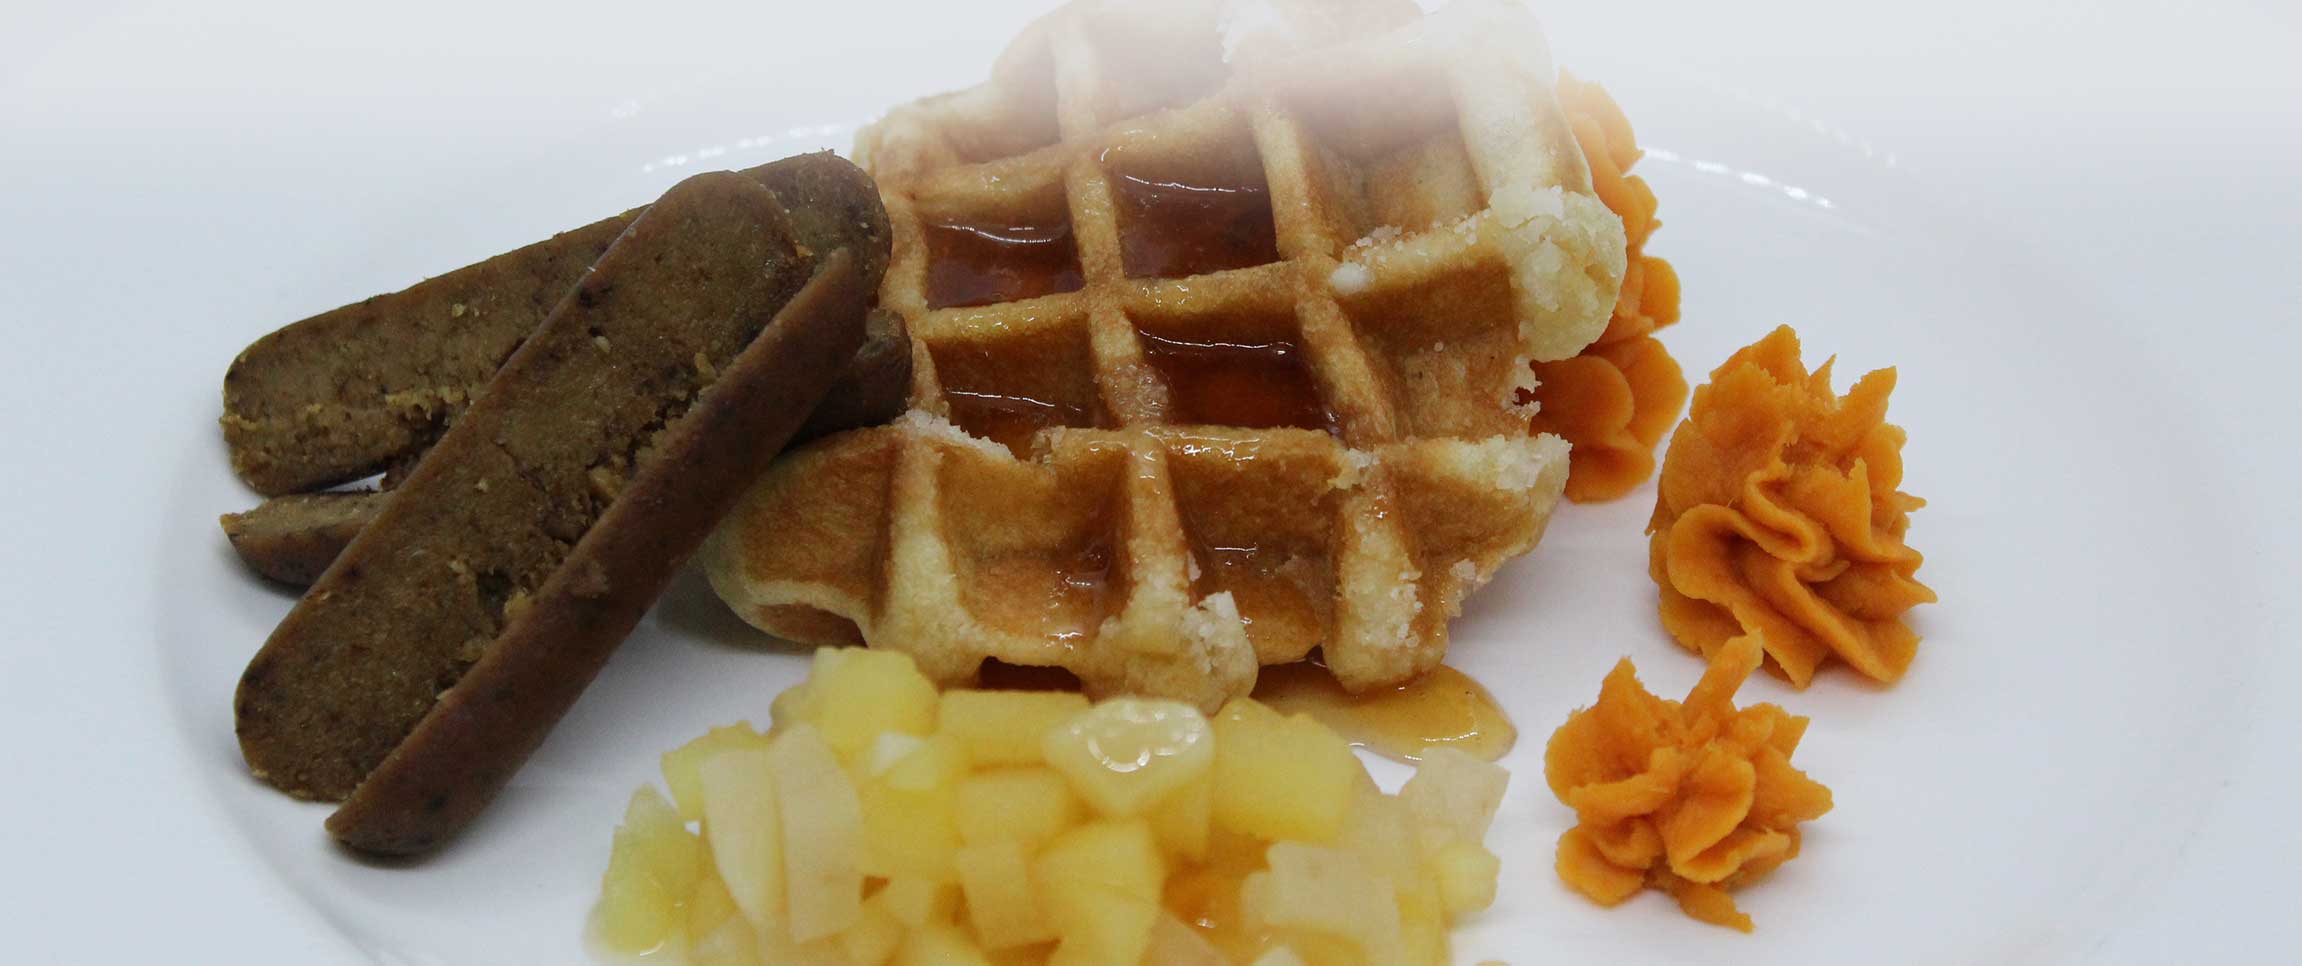 Green Origin Breakfast Link with Sweet Waffle, Cider Poached Apples and Pears, Hard Cider Syrup